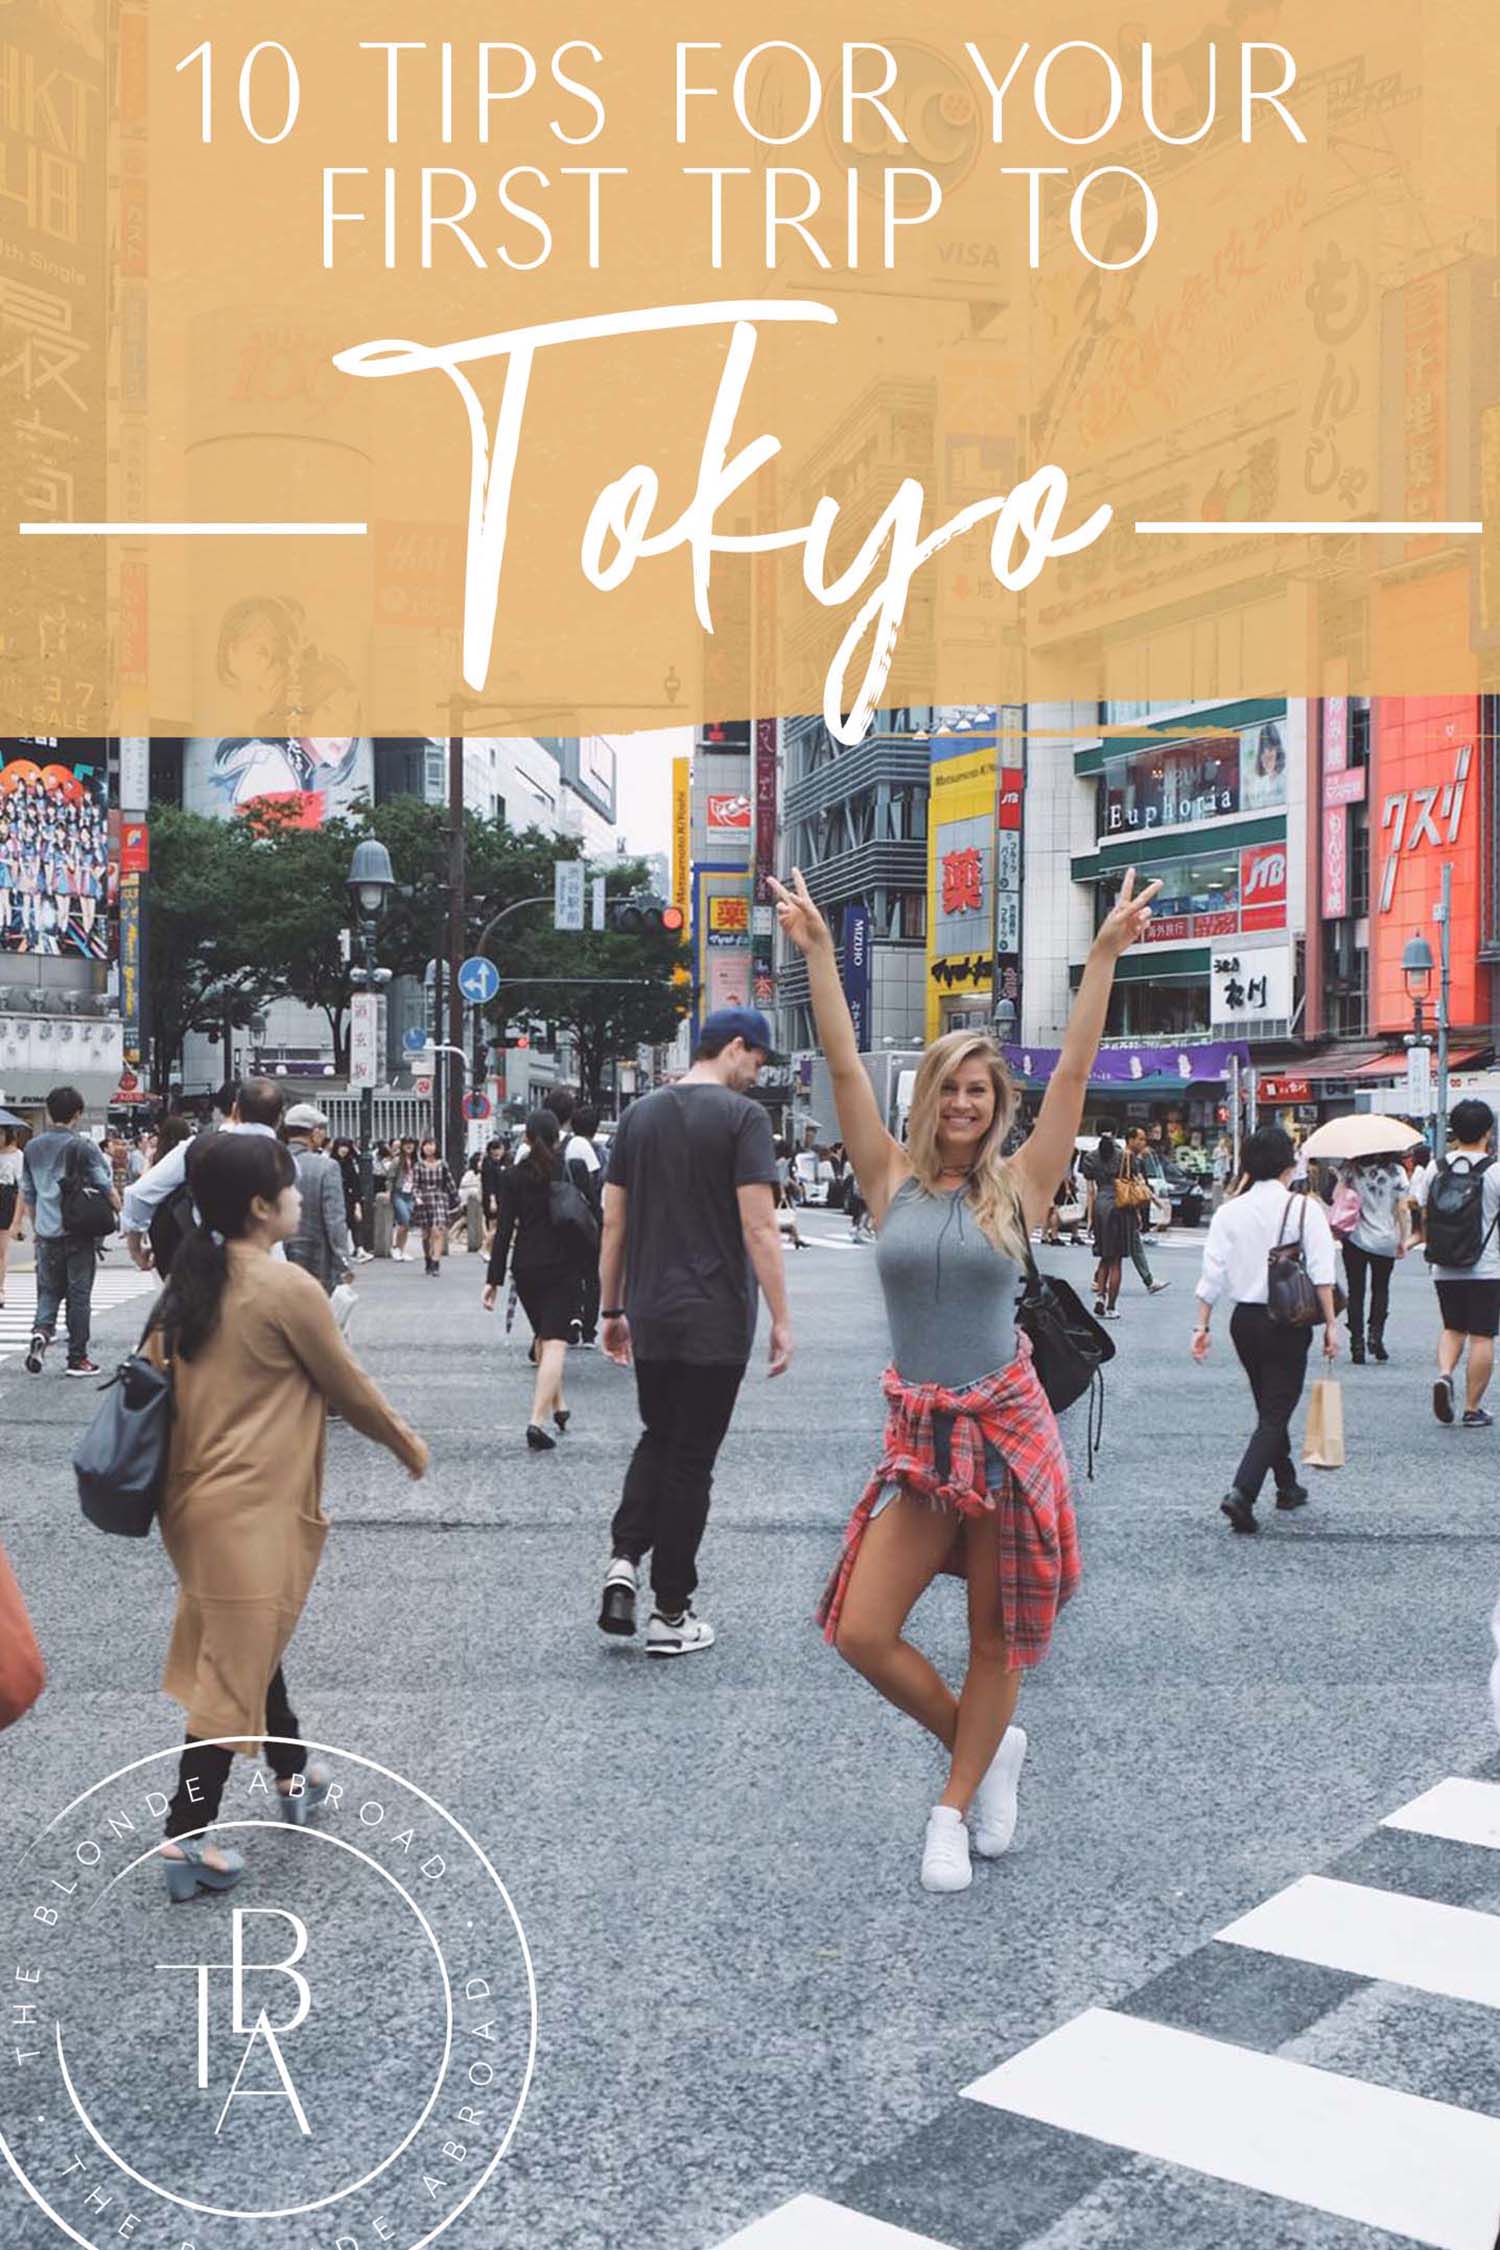 10 Tips for First Trip to Tokyo Japan